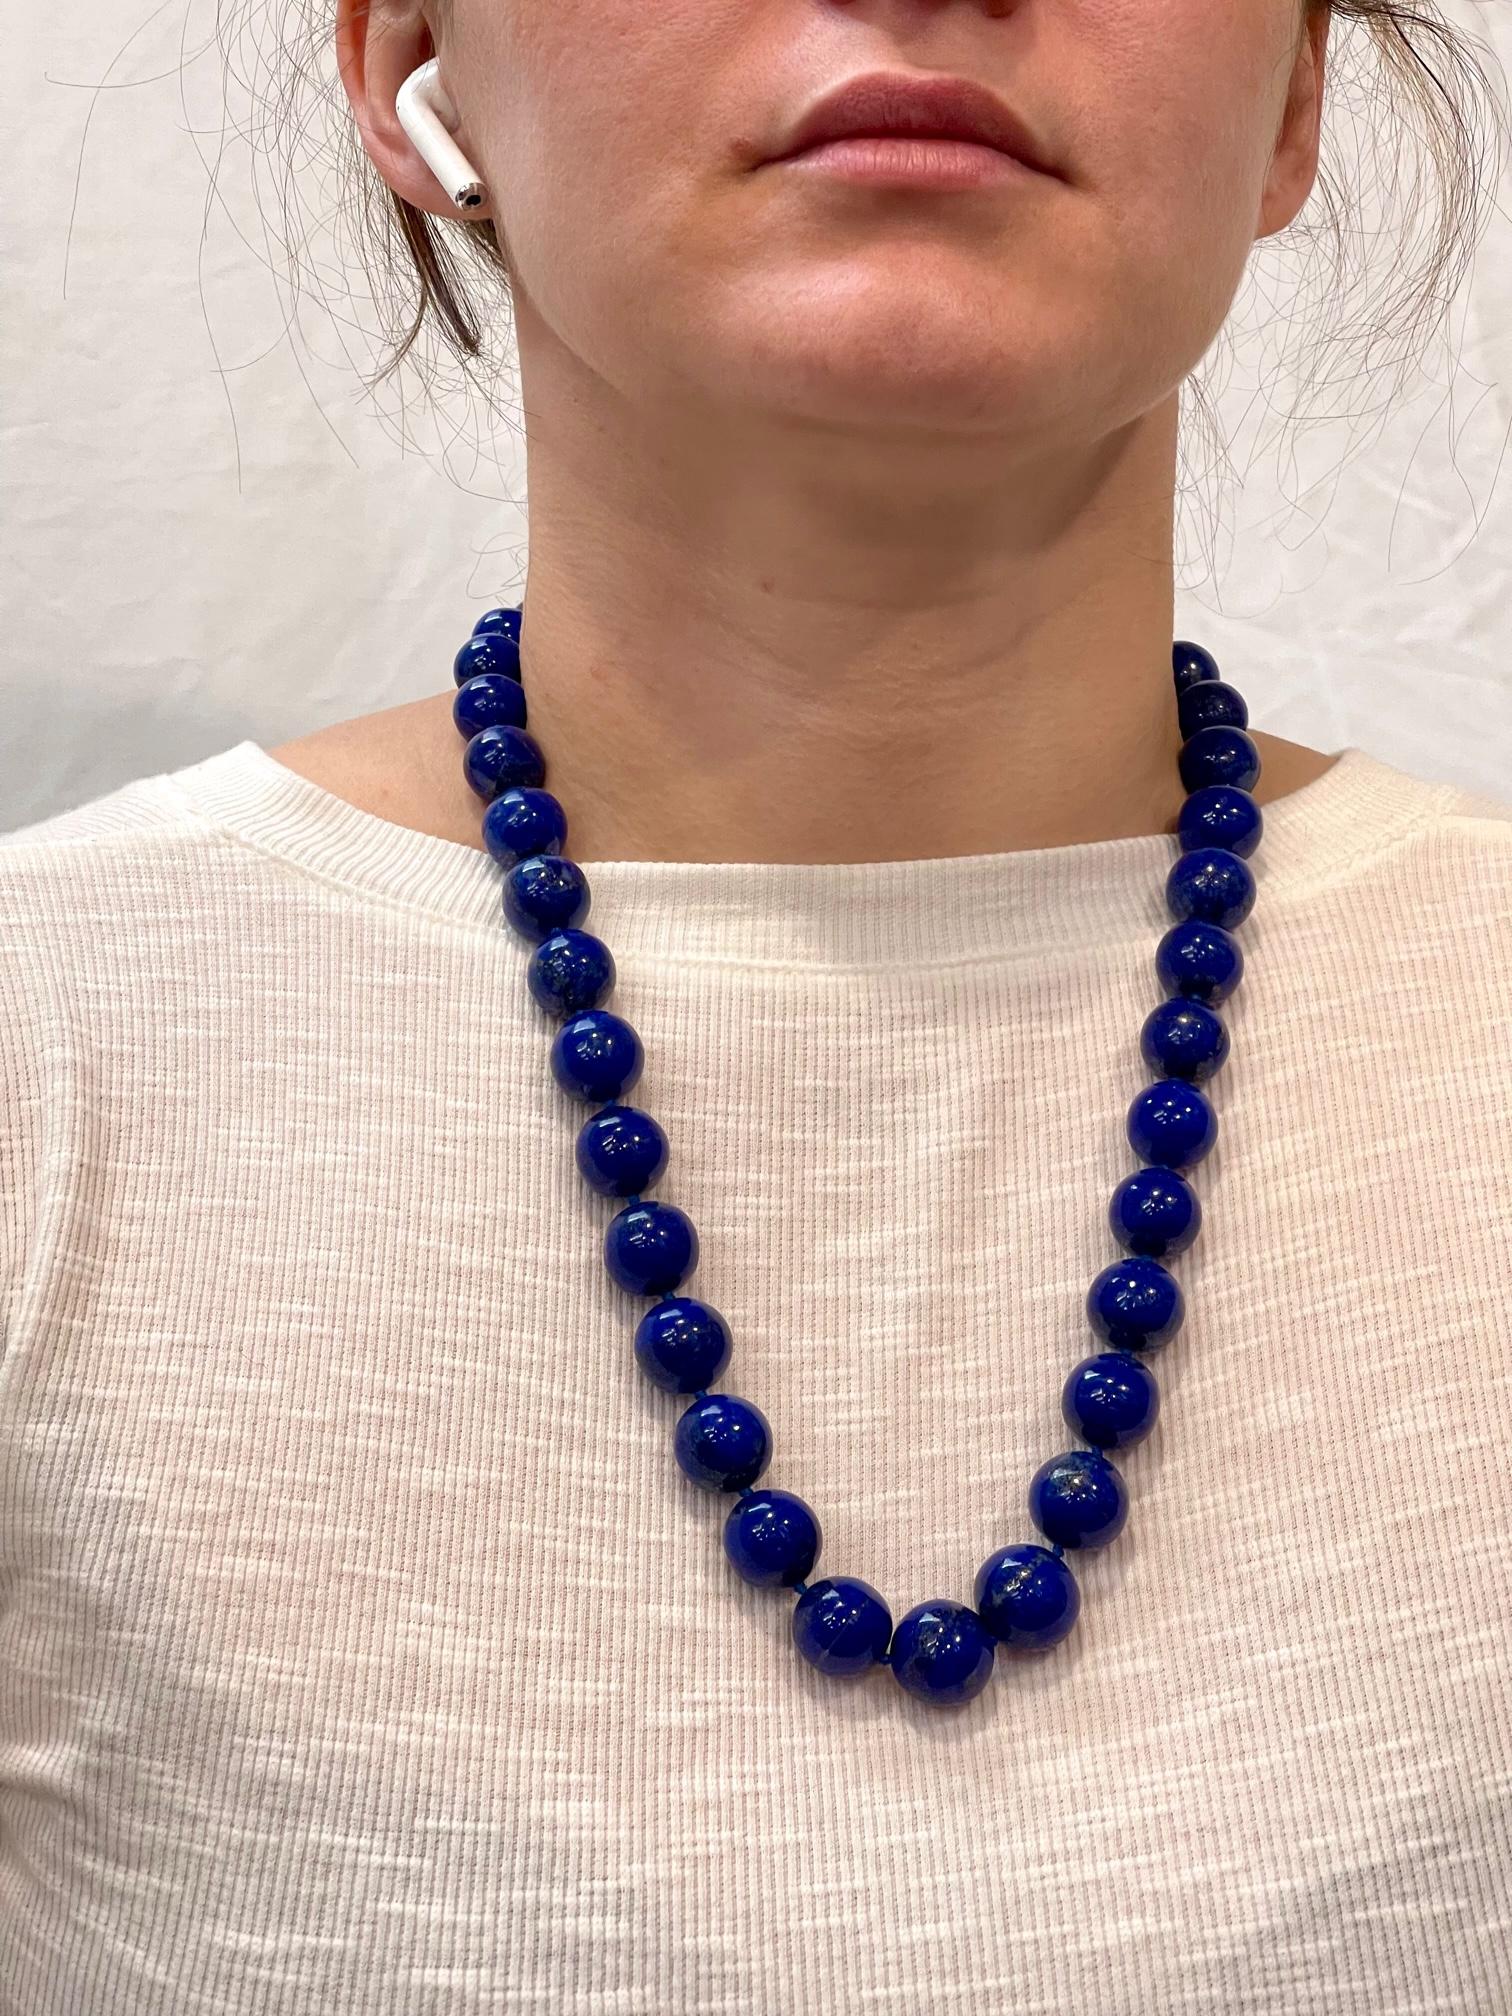 Vintage Lapis Lazuli Single Strand Necklace with 14 Karat Yellow Gold Lobster For Sale 9